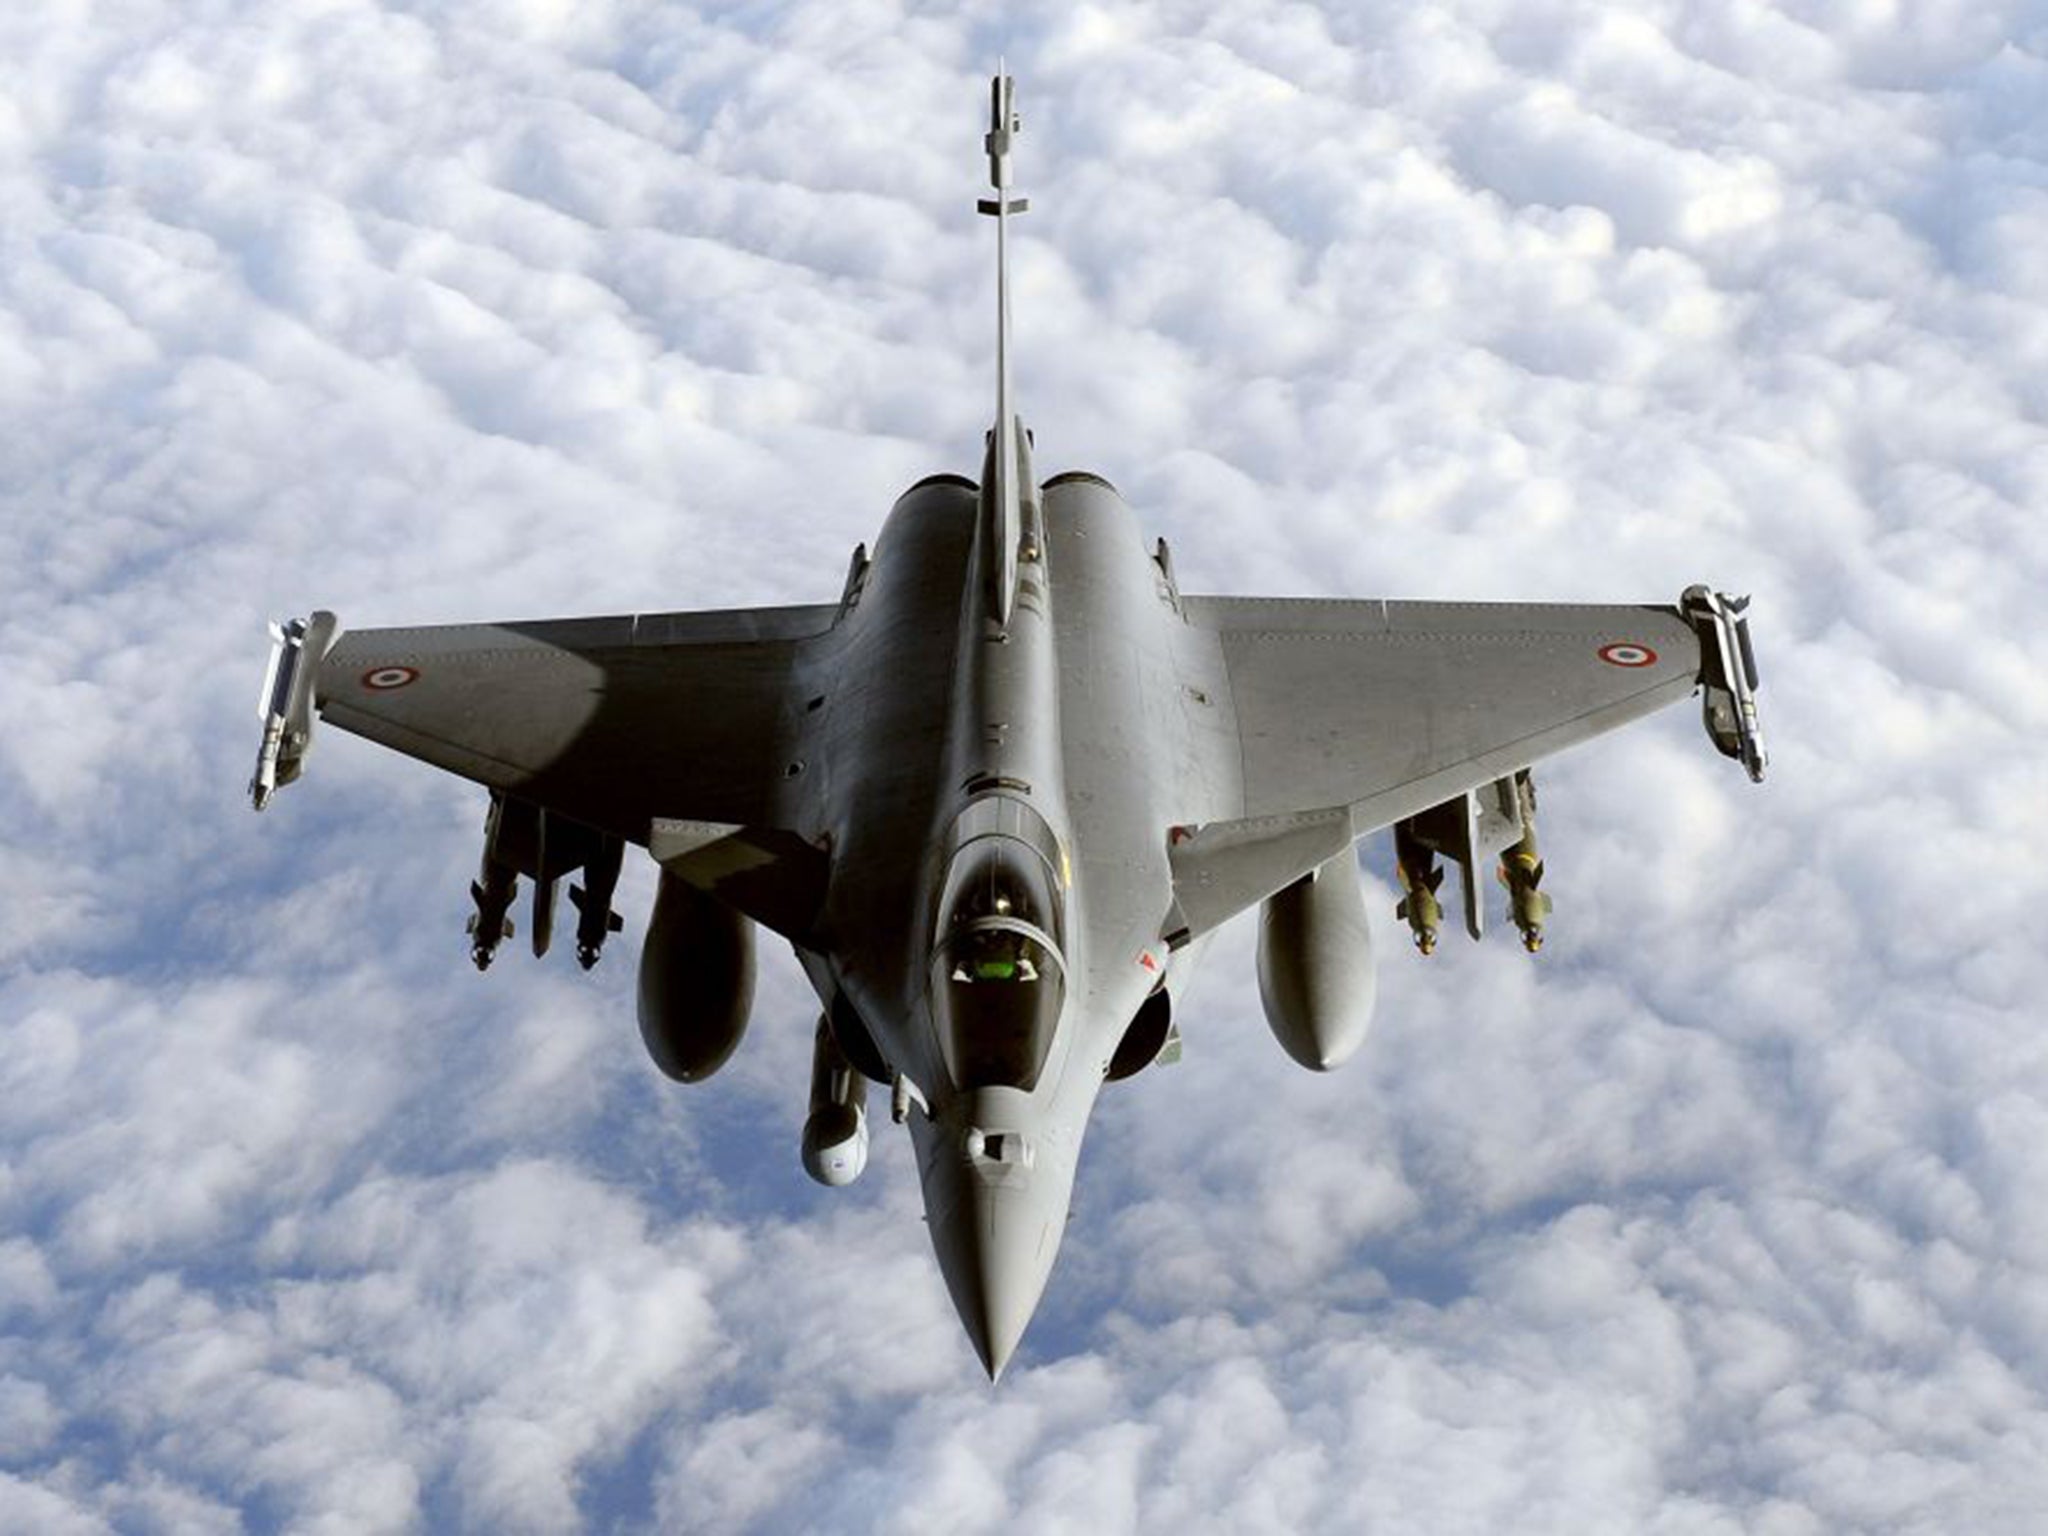 The Rafale has been second best to its American rivals and to the part-British “Eurofighter” or Typhoon